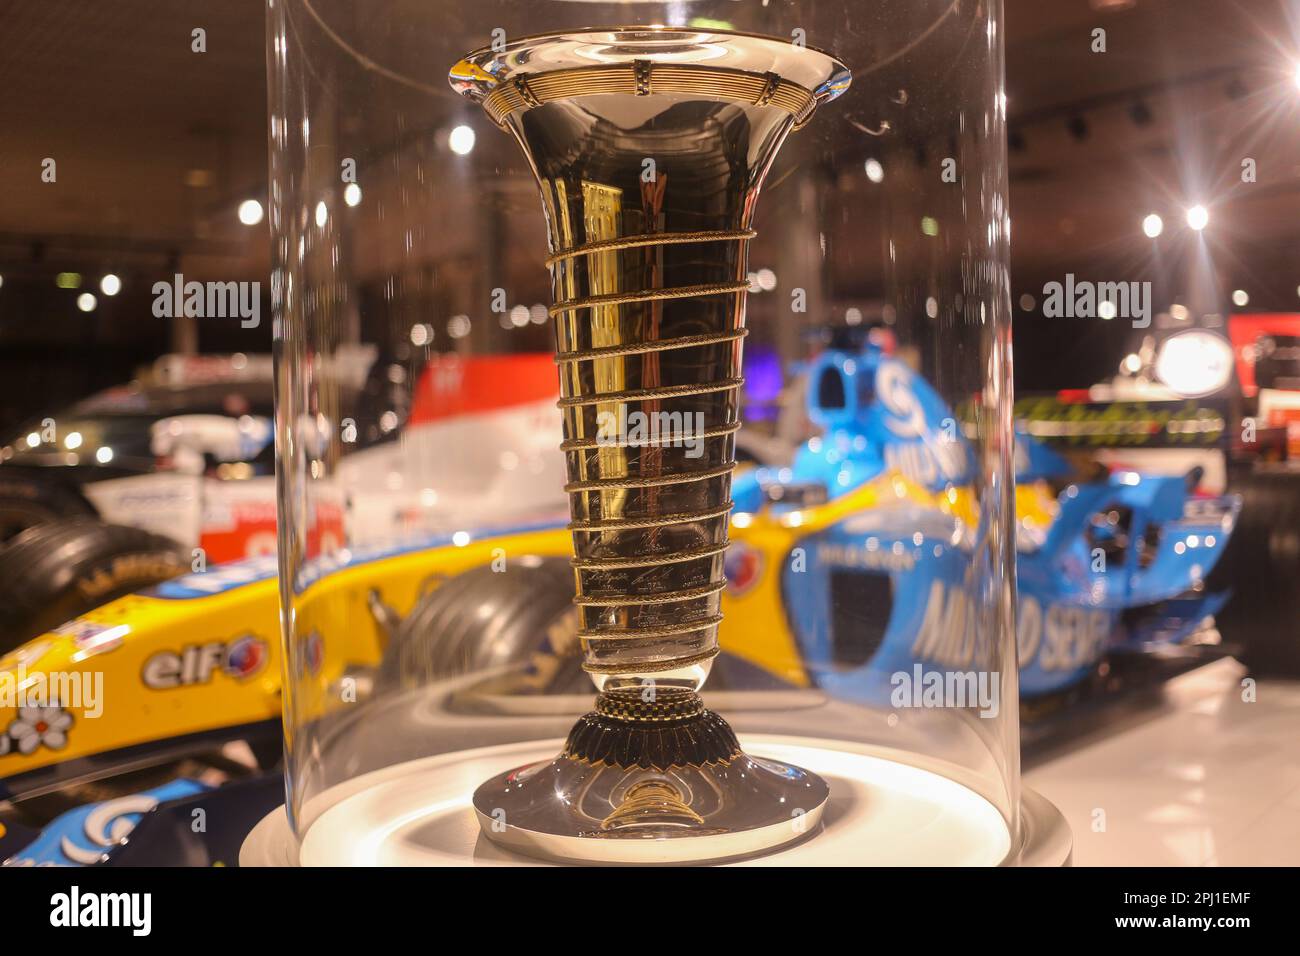 File:F1 Drivers' World Championship trophy (cropped).jpg - Wikimedia Commons